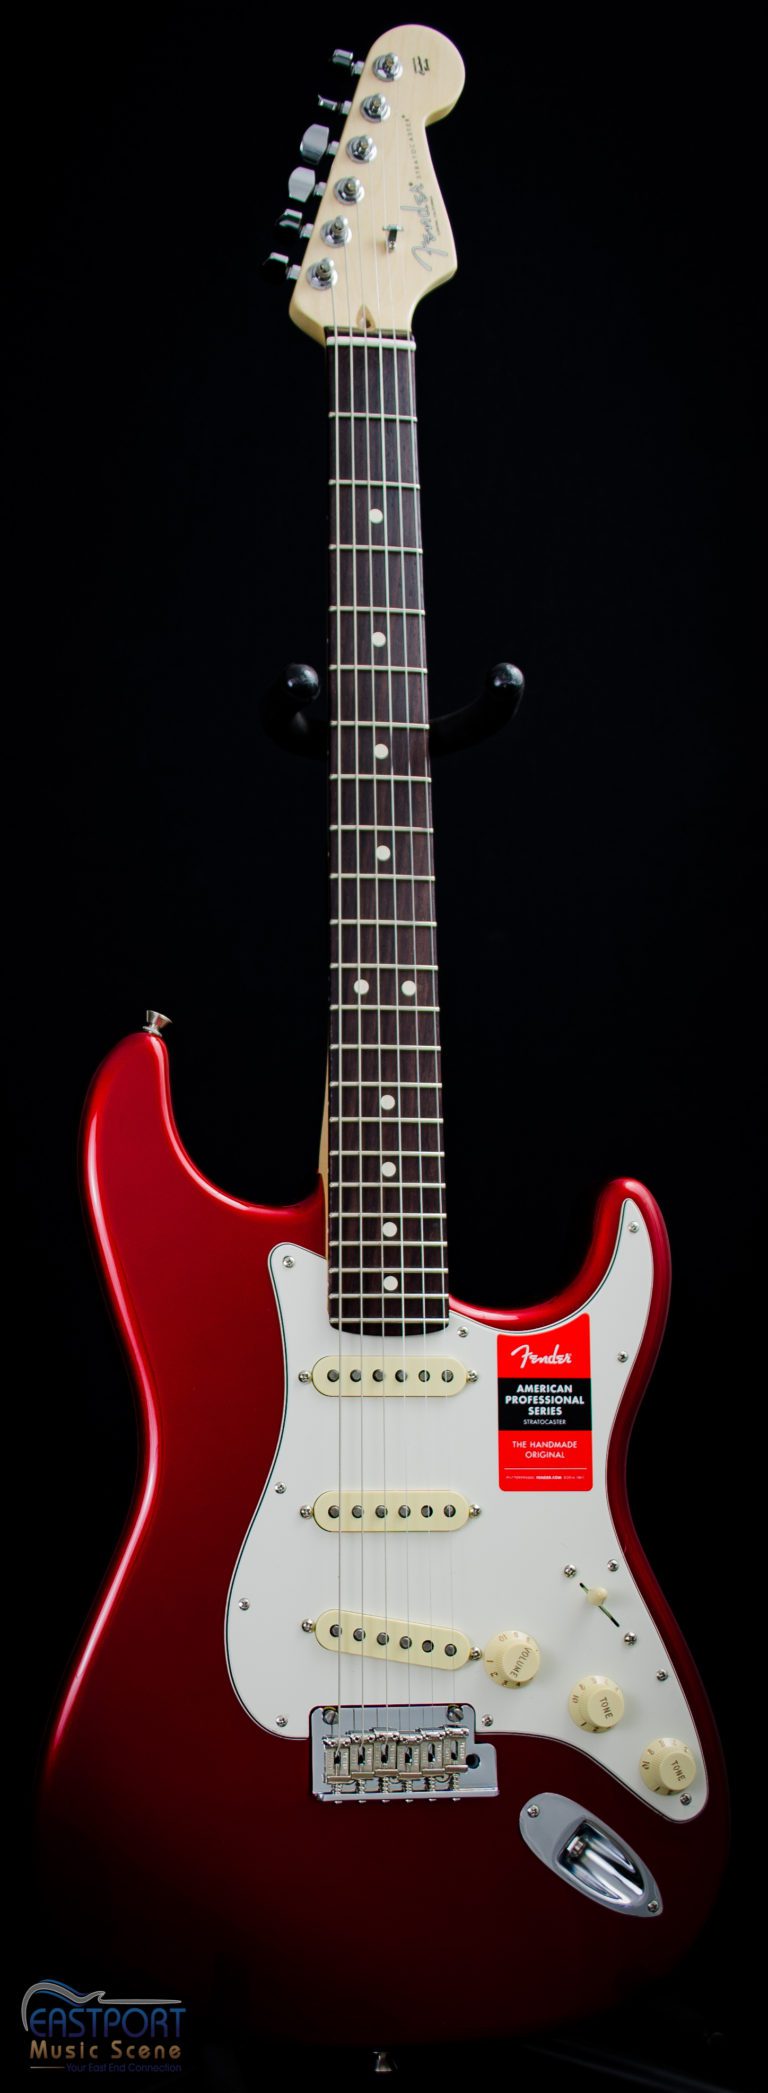 A red electric guitar with white and black fretboard.